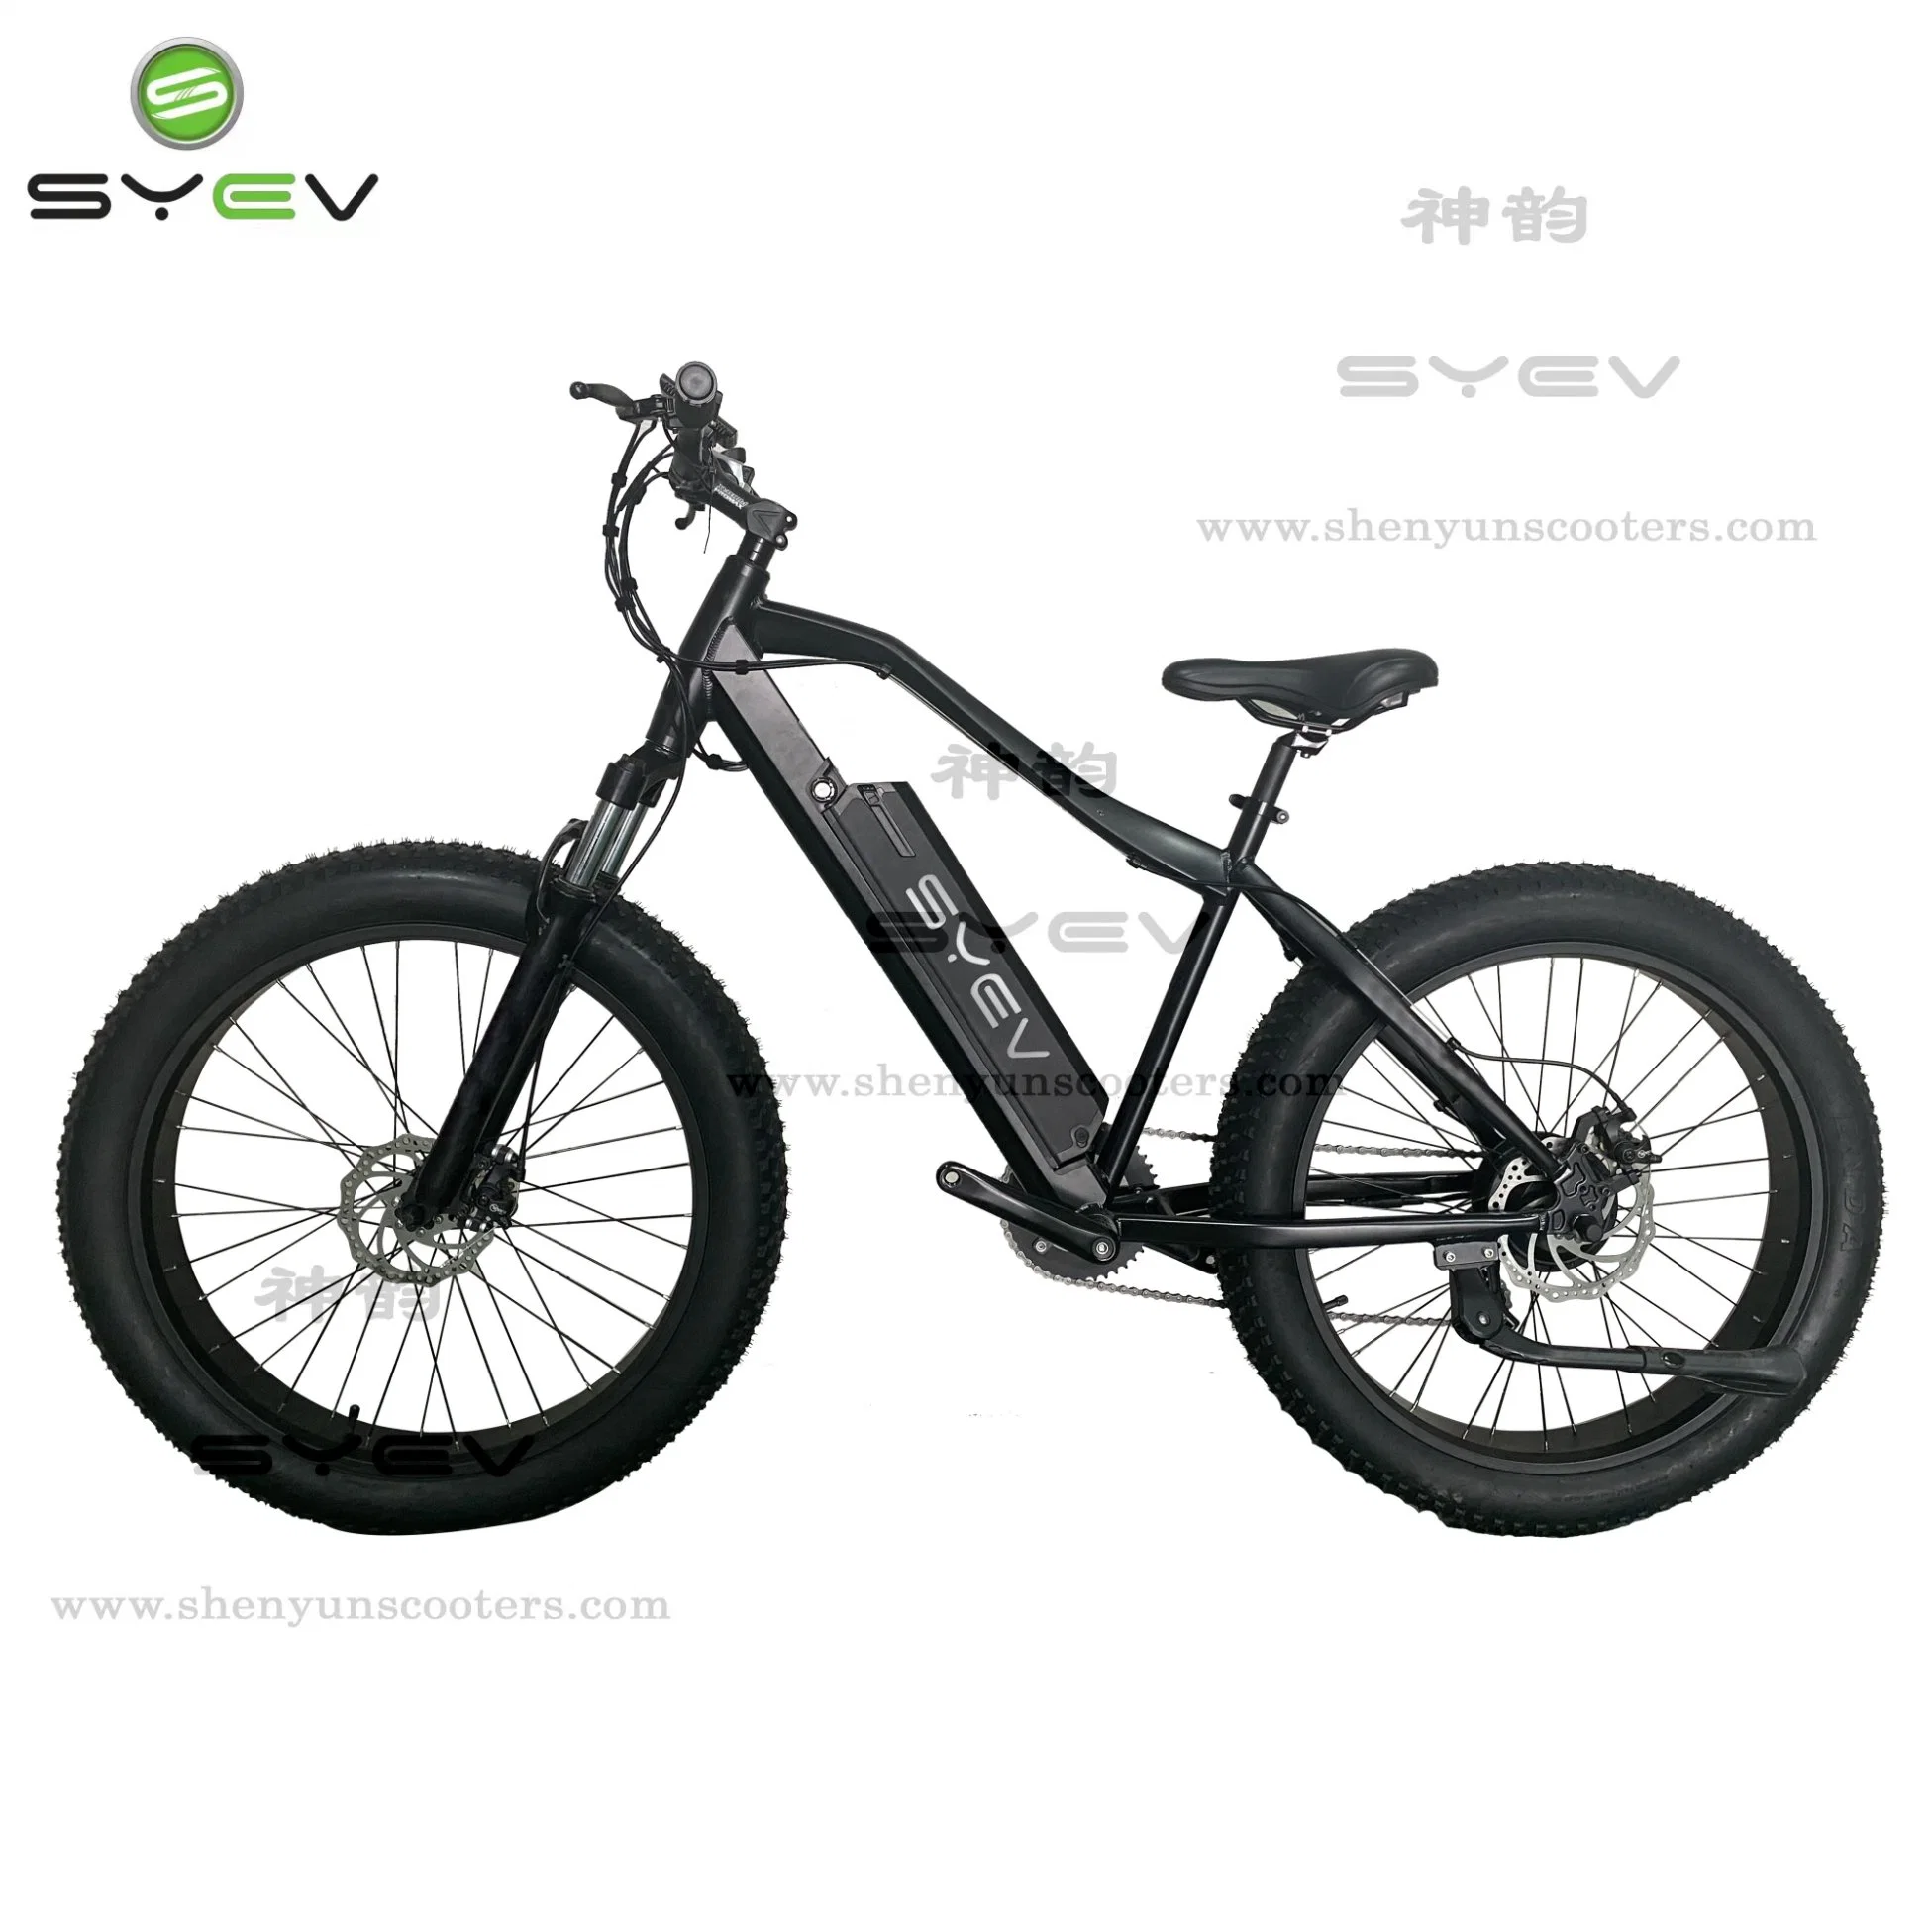 Wuxi Shenyun Factory New High Performance 26" Fat Tyre Aluminum Alloy Mountain Electric Bike for Heavy Riders